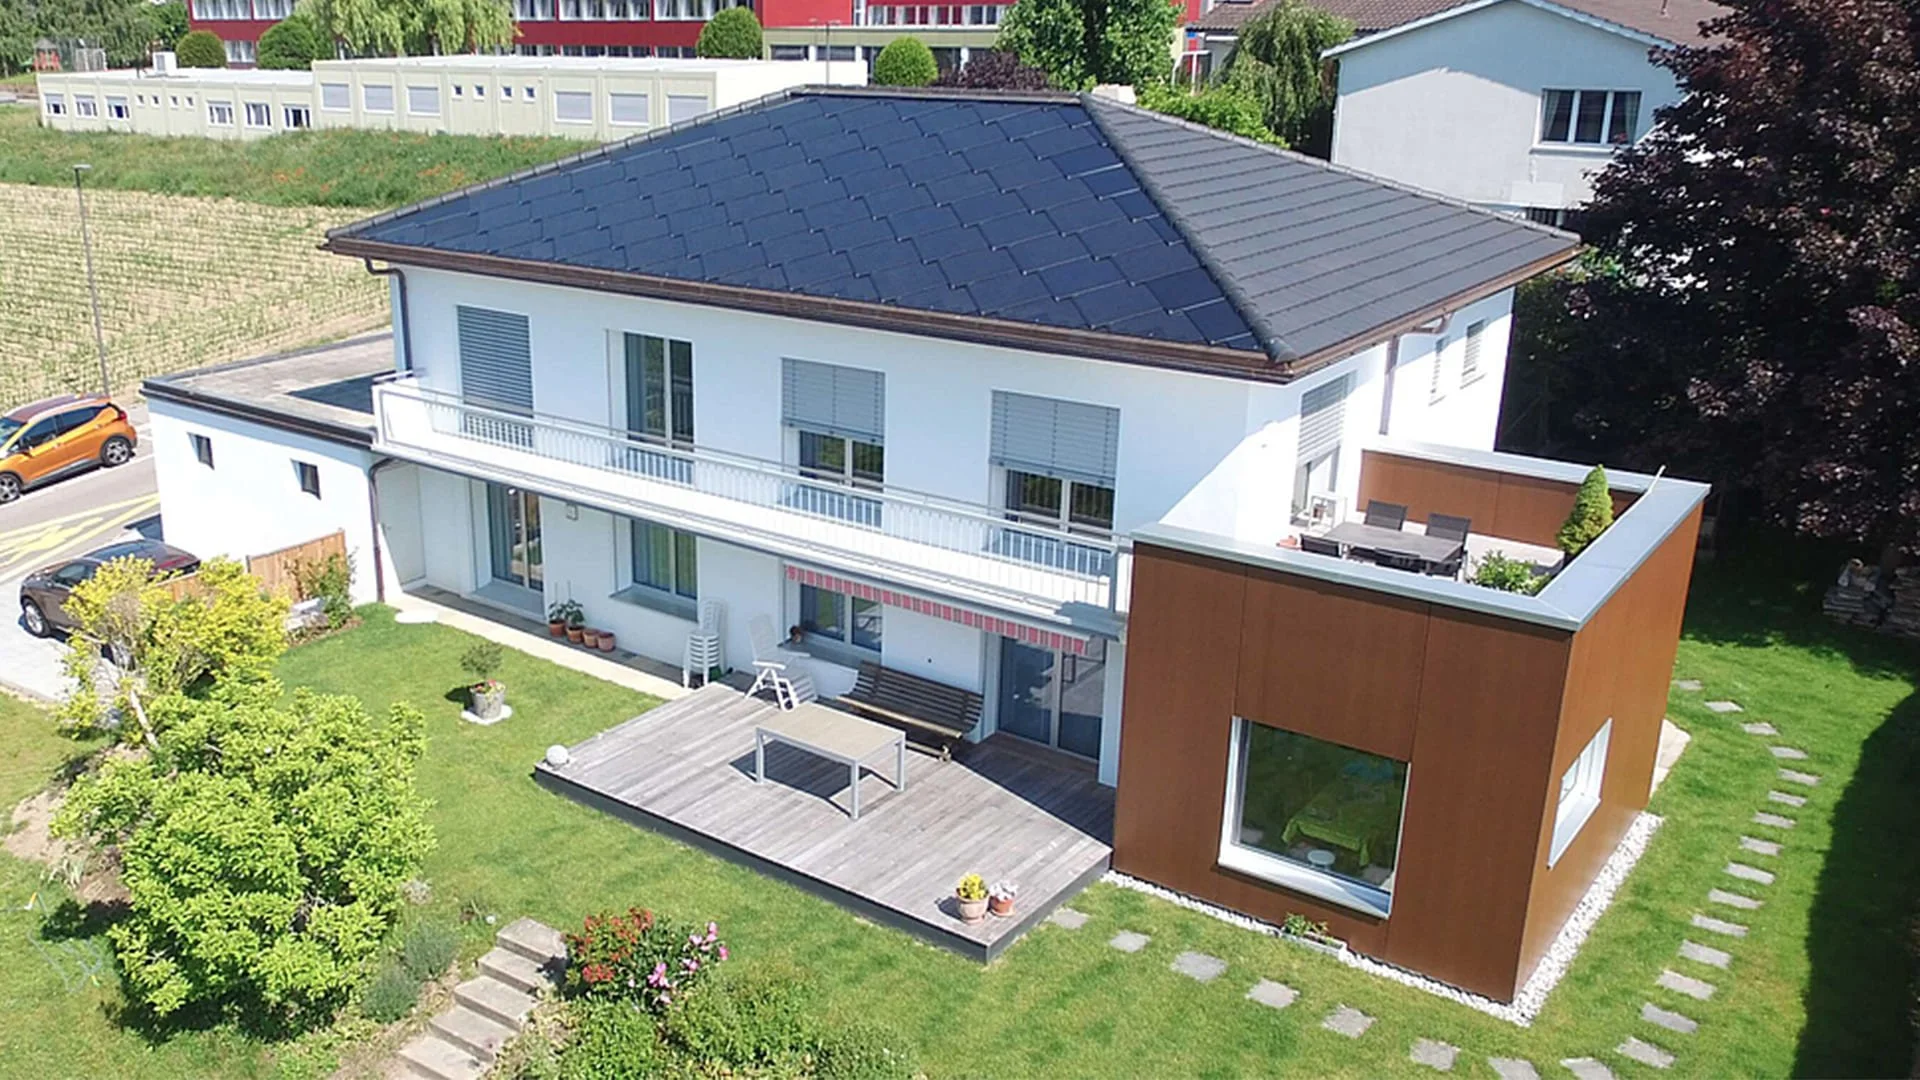 SunStyle Photovoltaic Fully Integrated sustainable roof